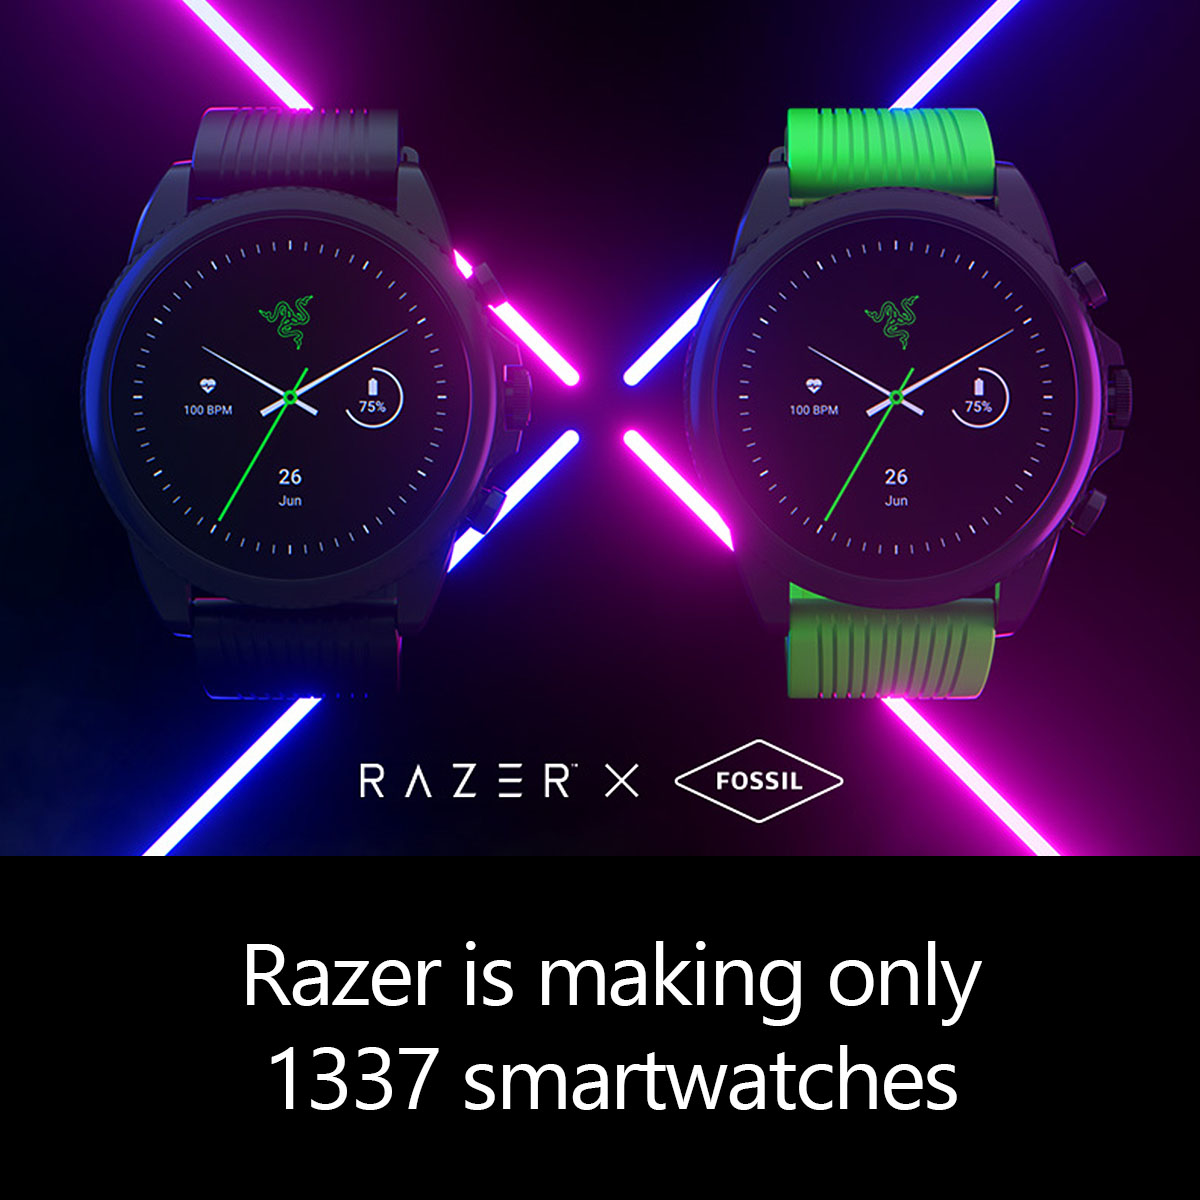 Razer is making only 1337 smartwatches